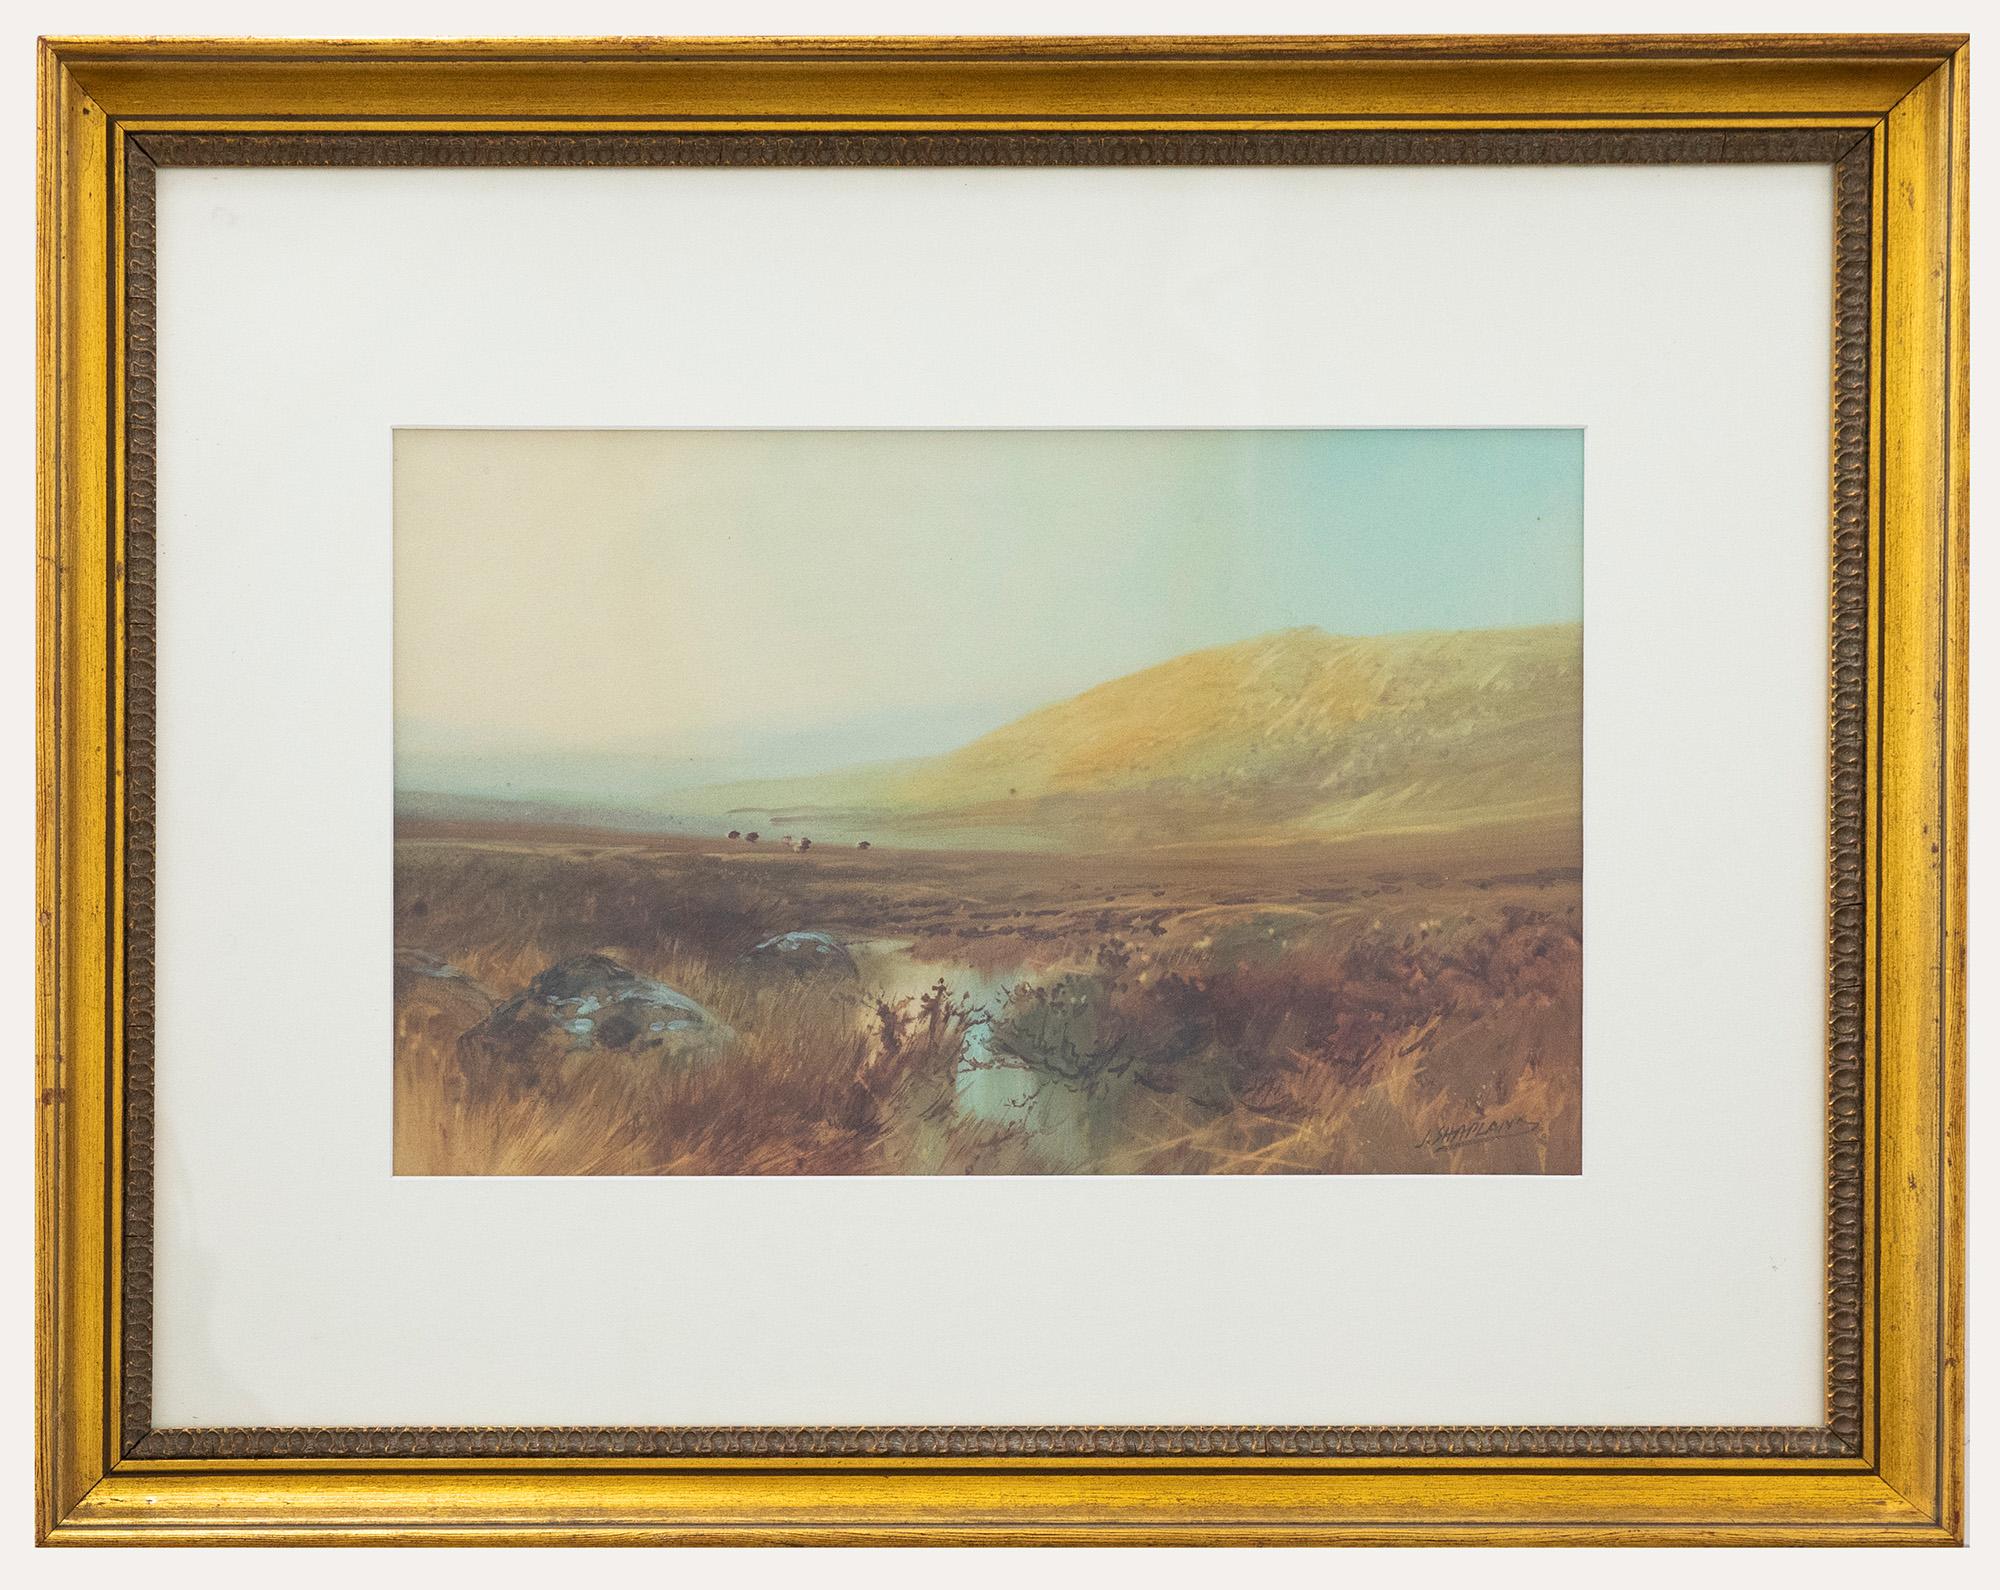 An original watercolour by the early 20th century landscape painter John Shapland (1865-1929). The scene depicts cattle grazing in open moorland. Signed by the artist to the lower right. Well-presented in a large gilt-effect frame with a lambs